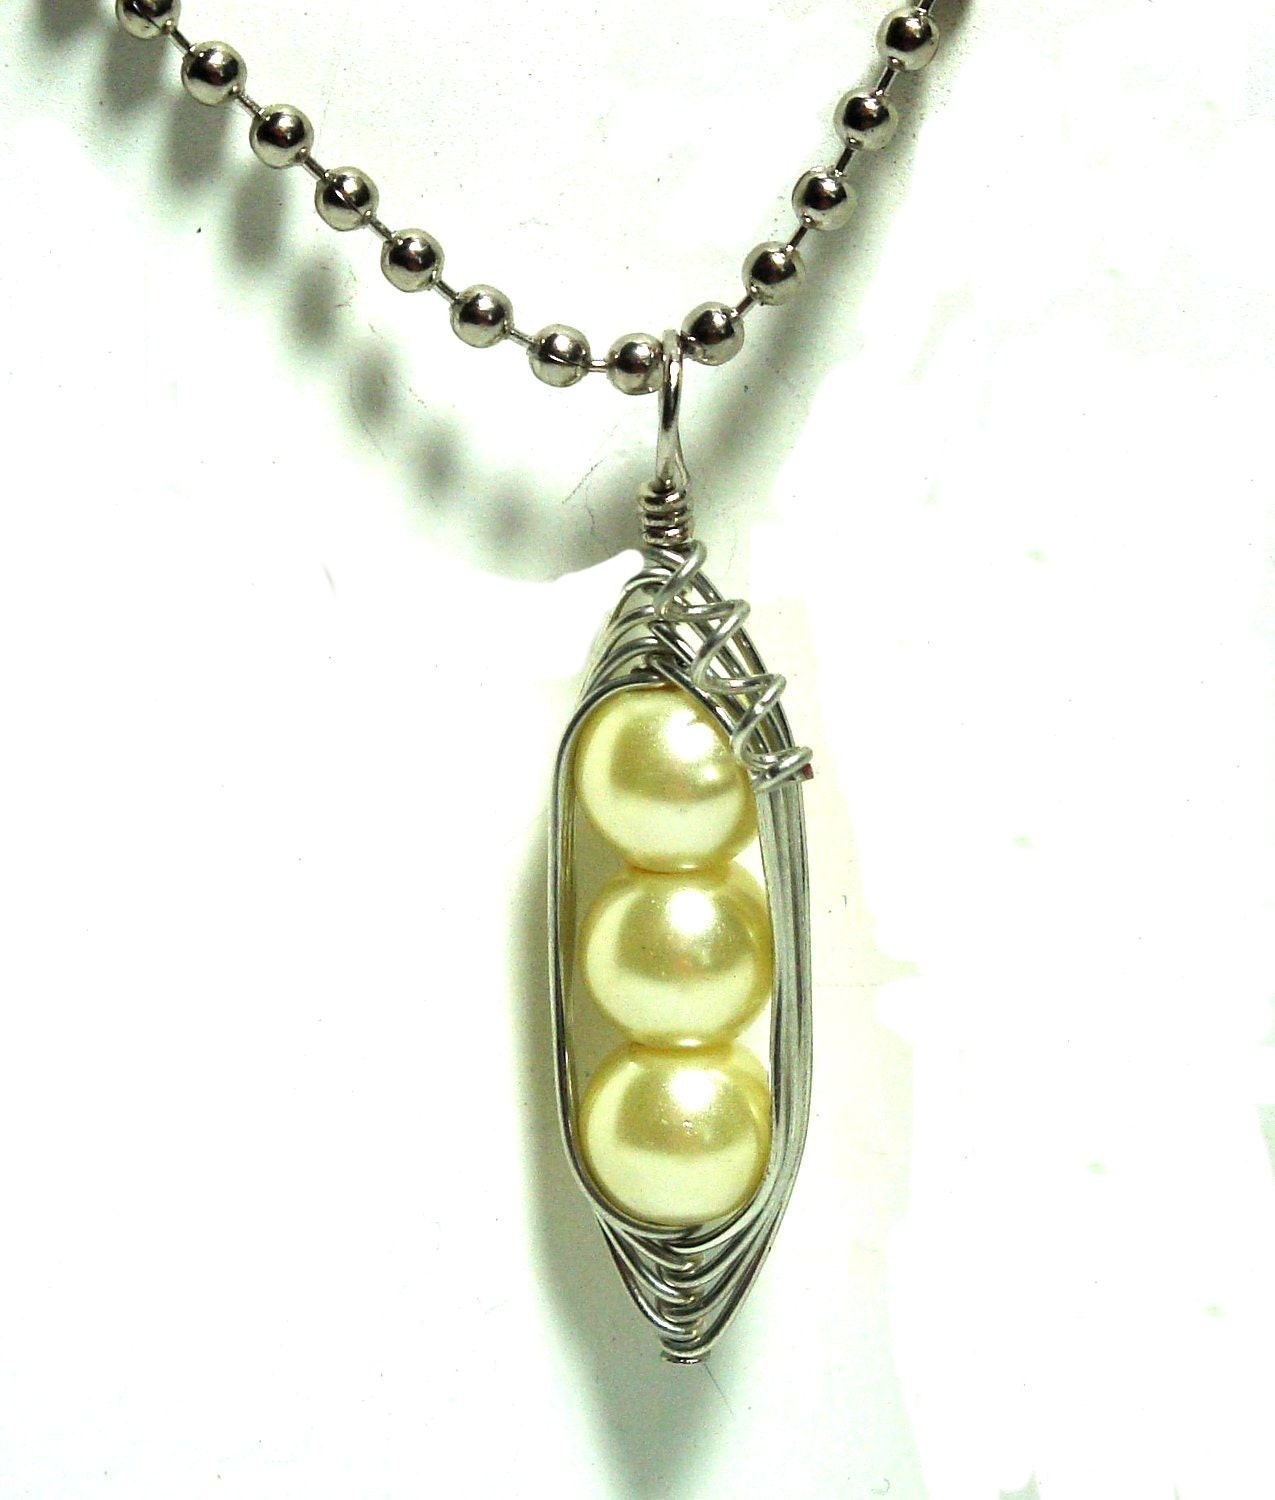   Necklace on Pea Pod Necklace  Peas In A Pod Pendant  Large Light Yellow Pearls Or